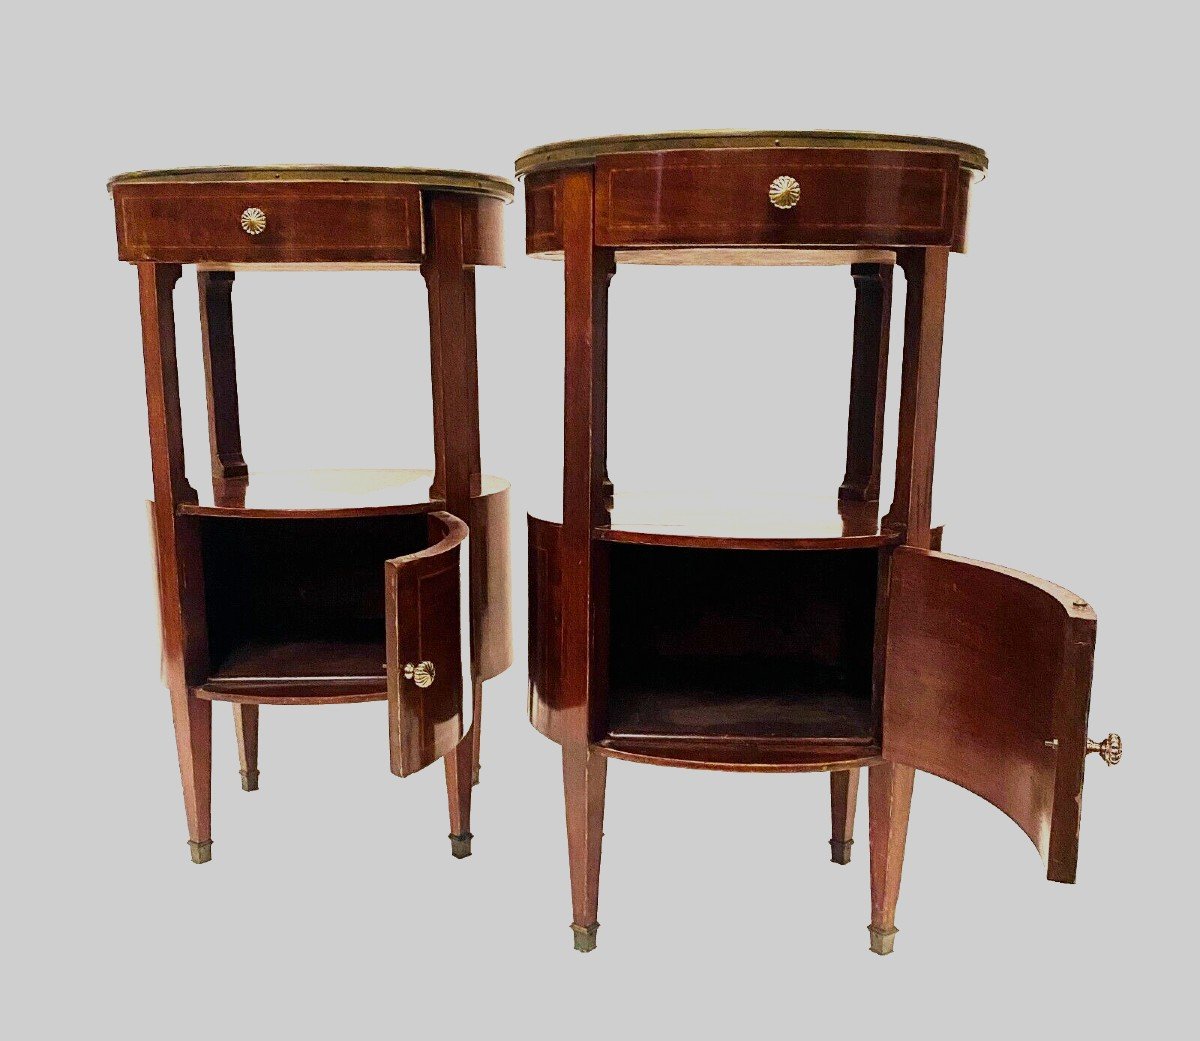 Pair Of Louis XVI Style Oval Bedside Tables In Mahogany And Veneer 20th Century-photo-3